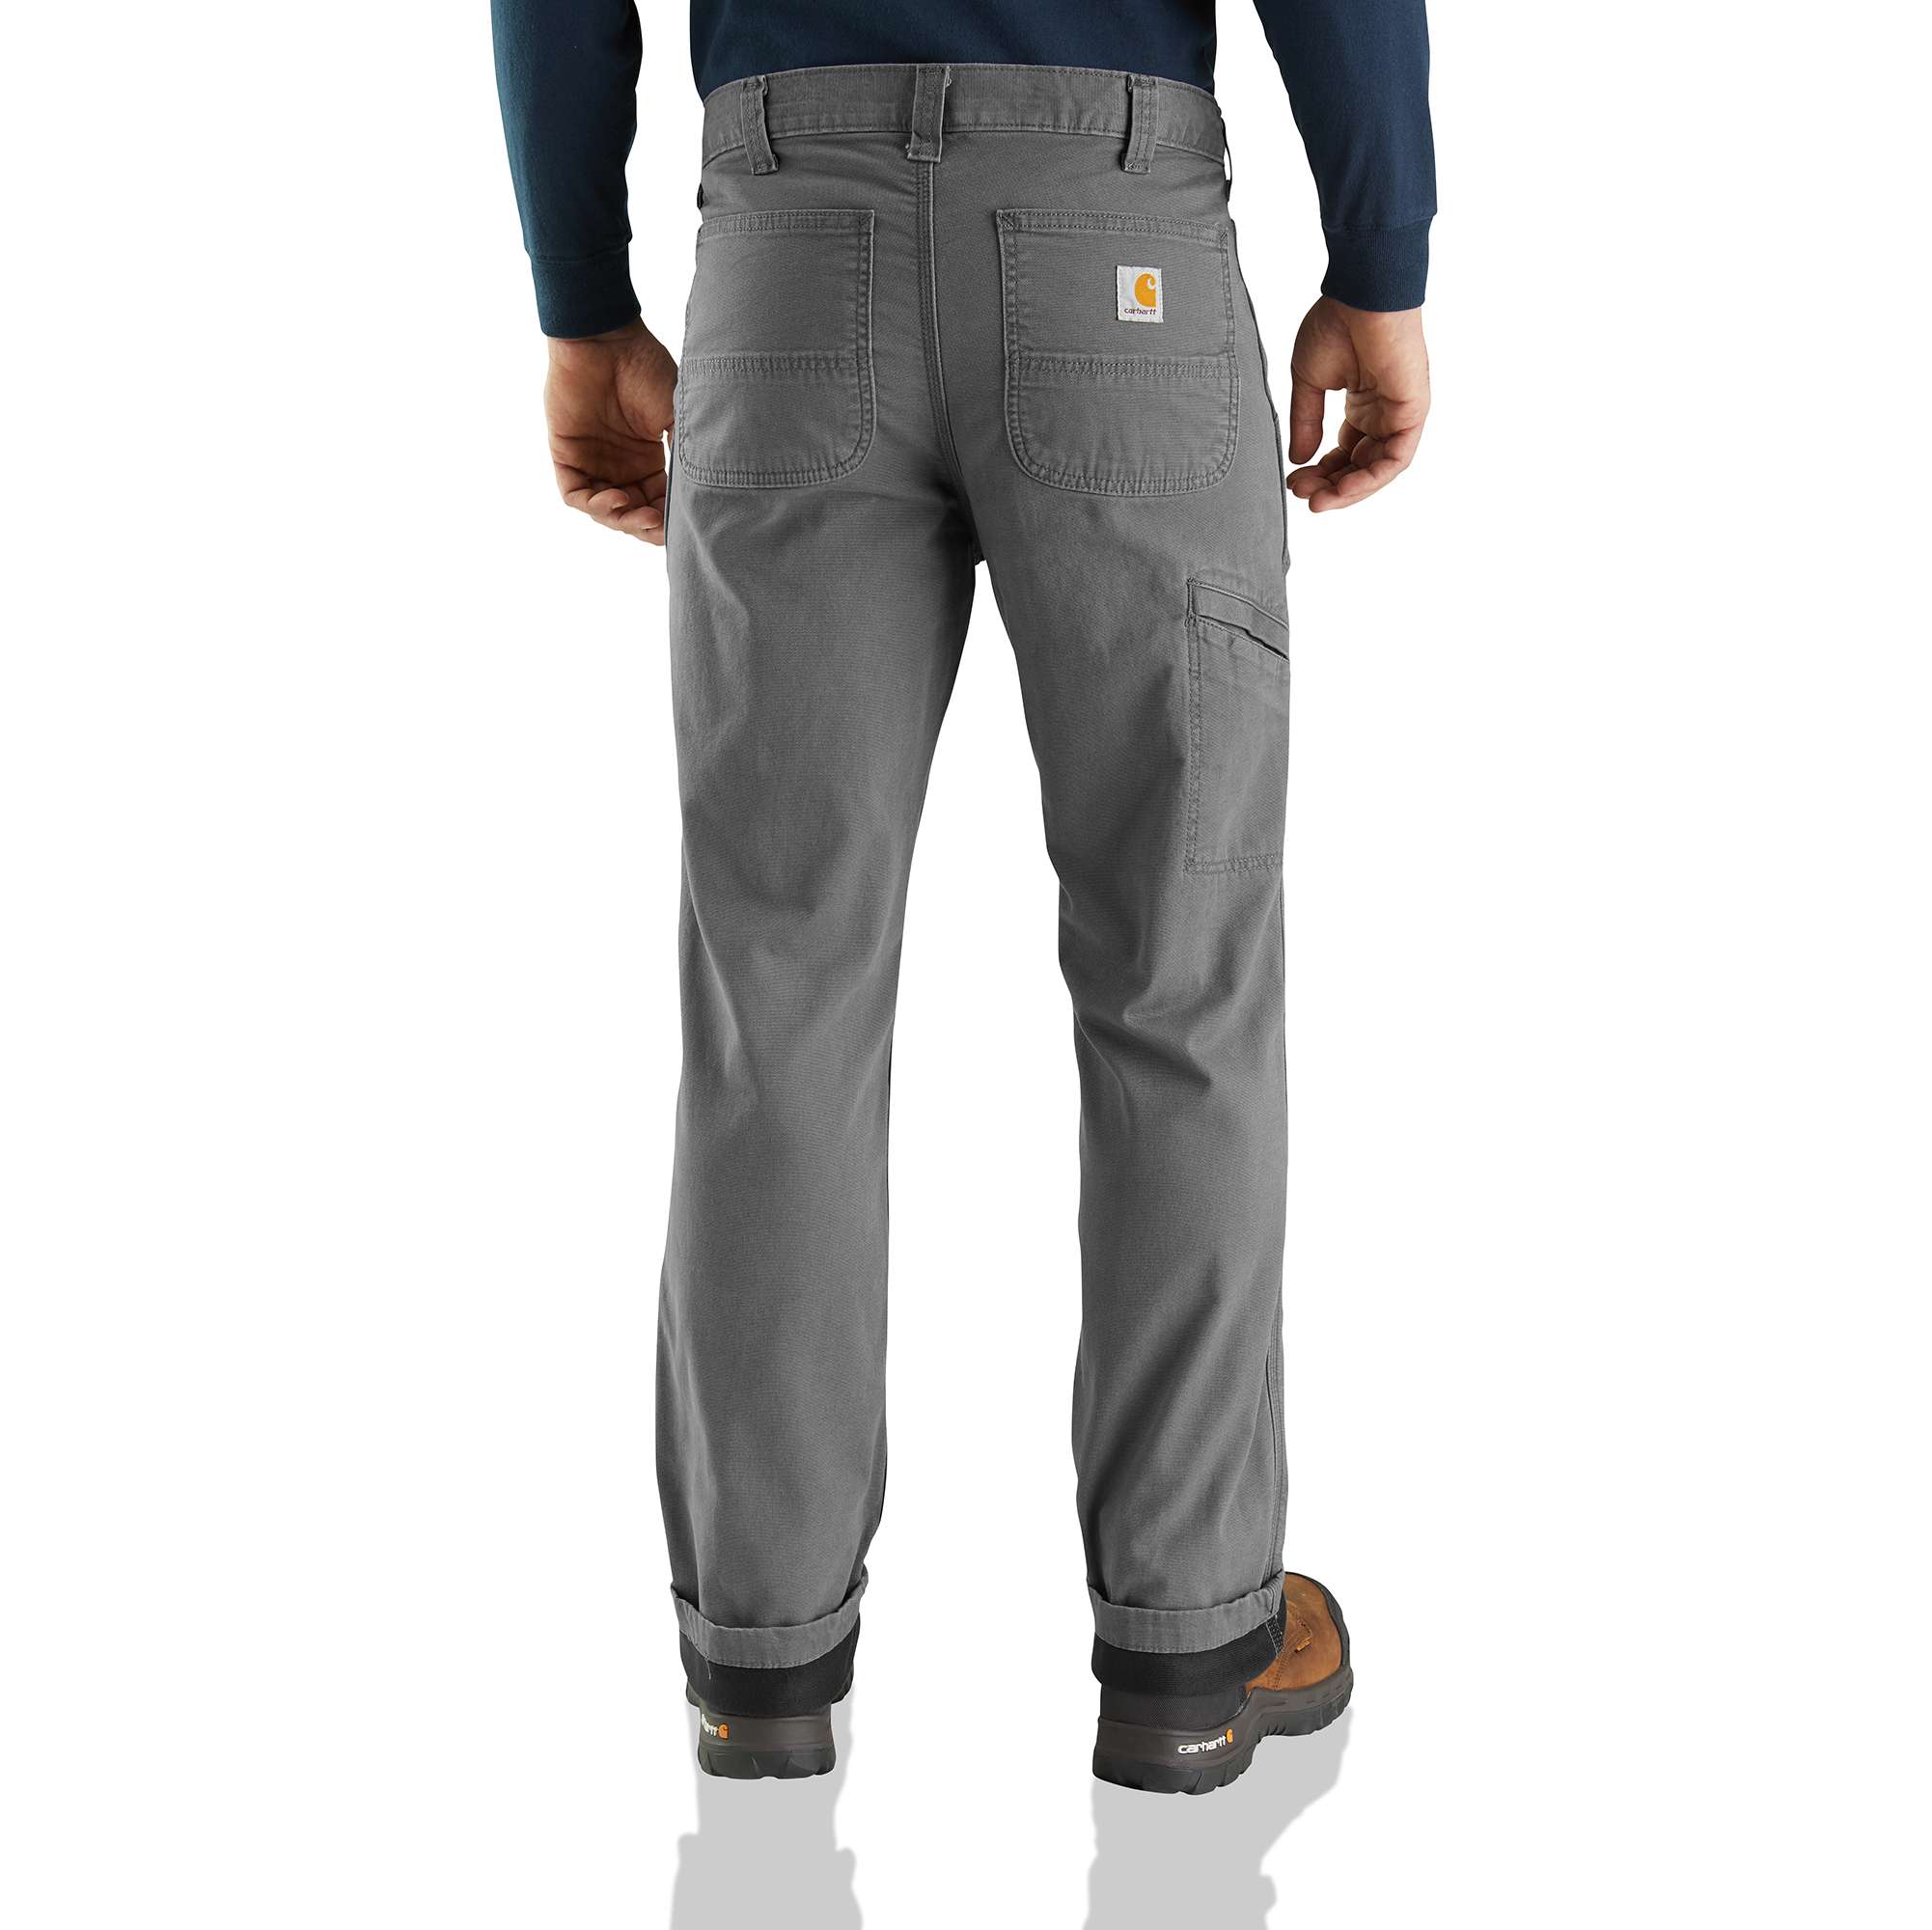 thermal lined pants